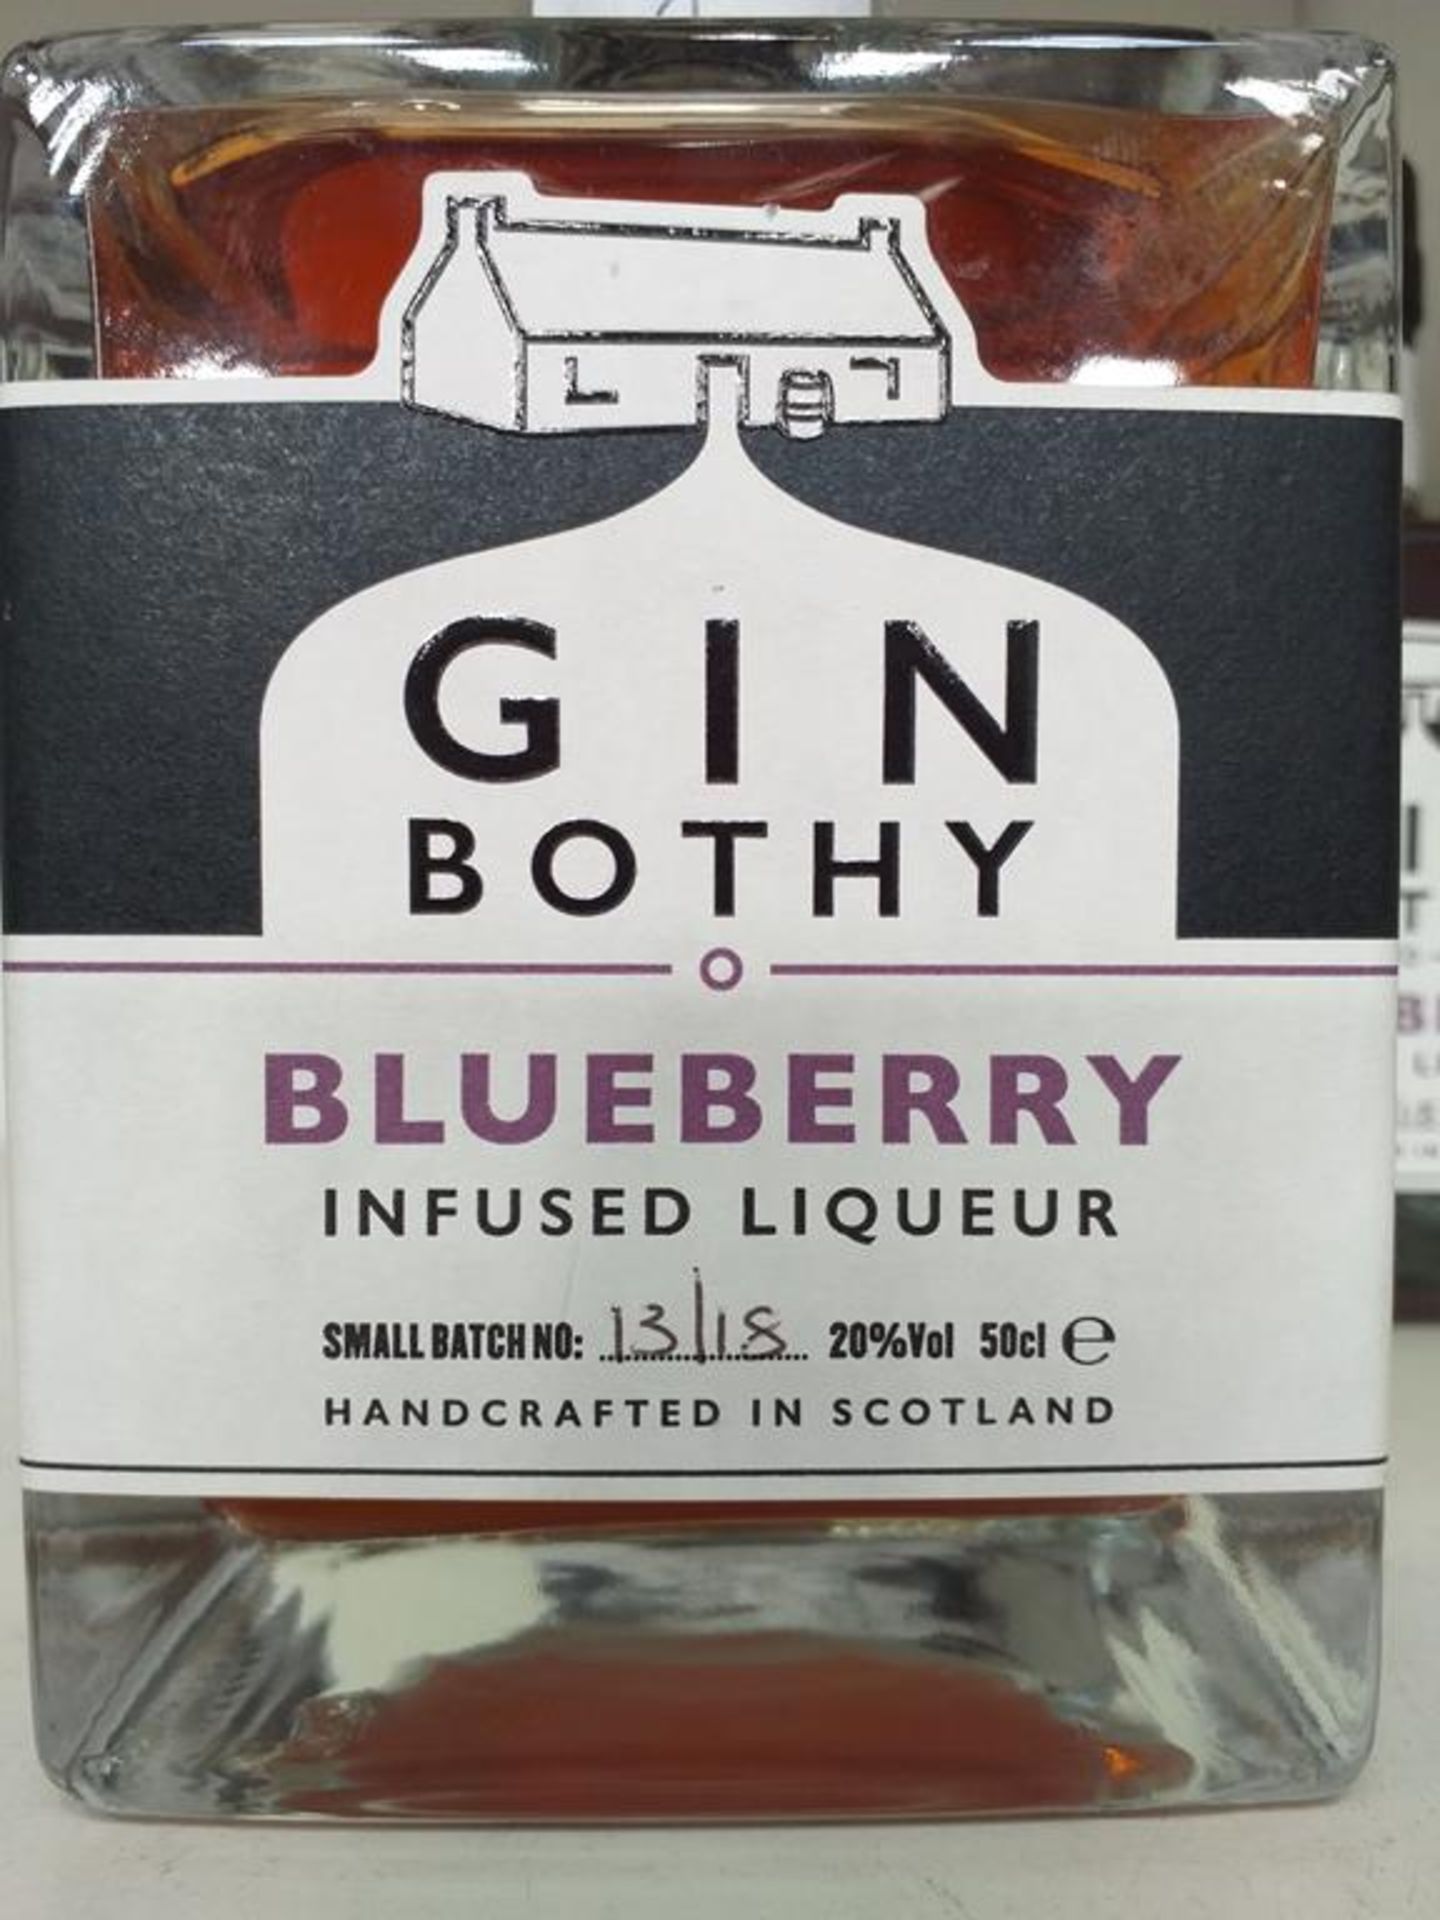 Four bottles of Gin Bothy Blueberry Infused Liqueur (one approximately bottle 95% full) - Image 2 of 4